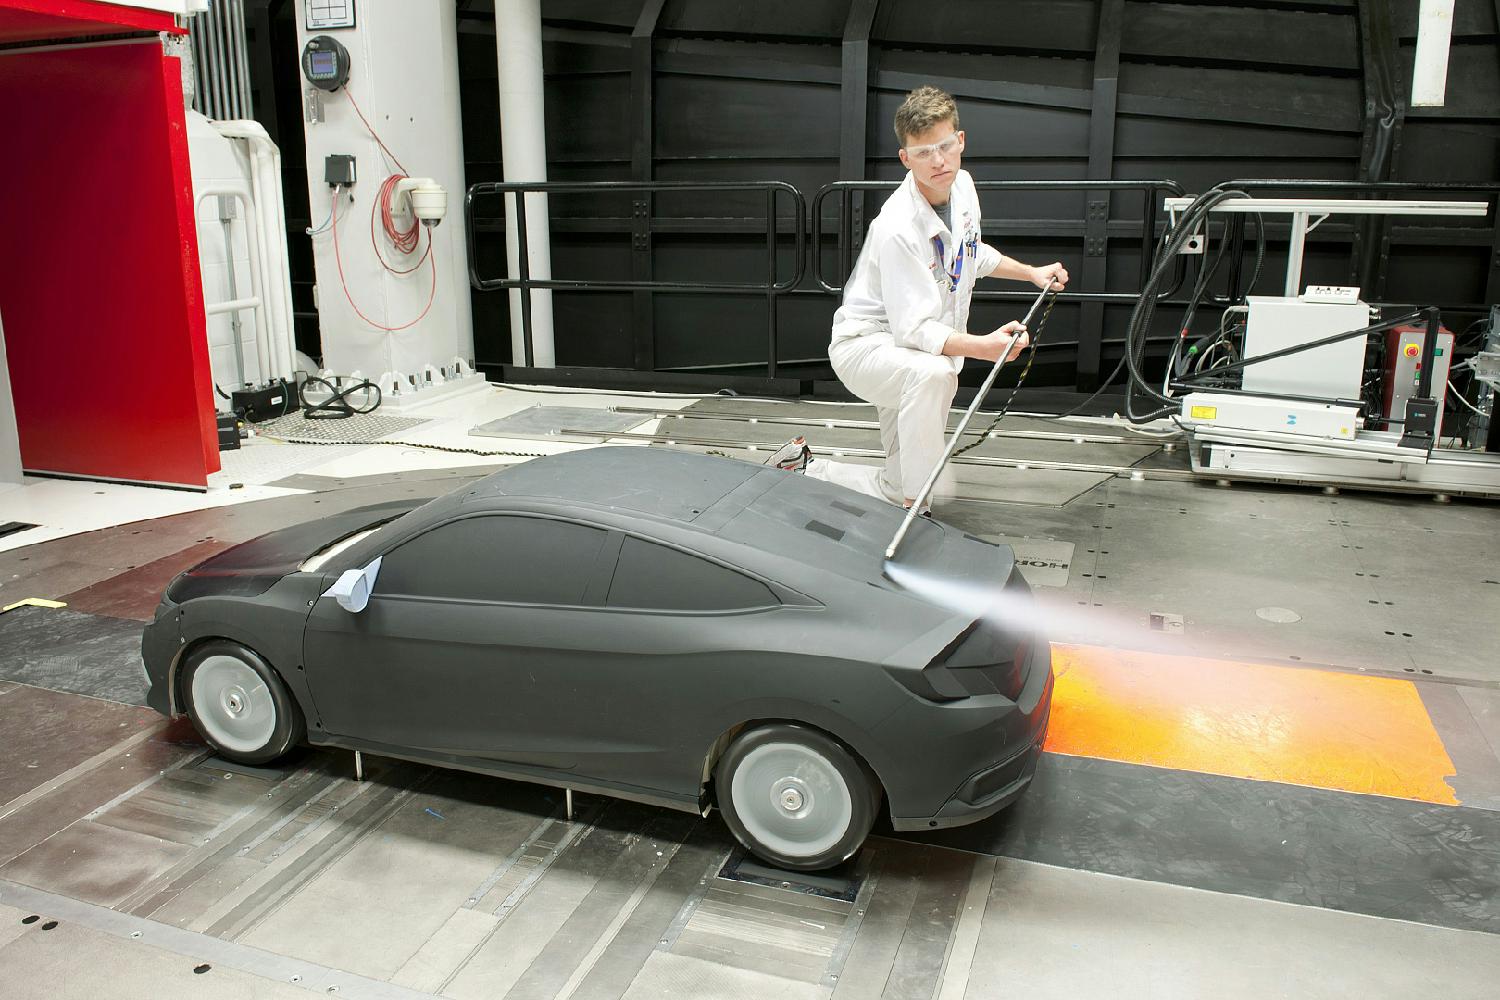 Associate conducting aerodynamic research in the scale model wind tunnel.
